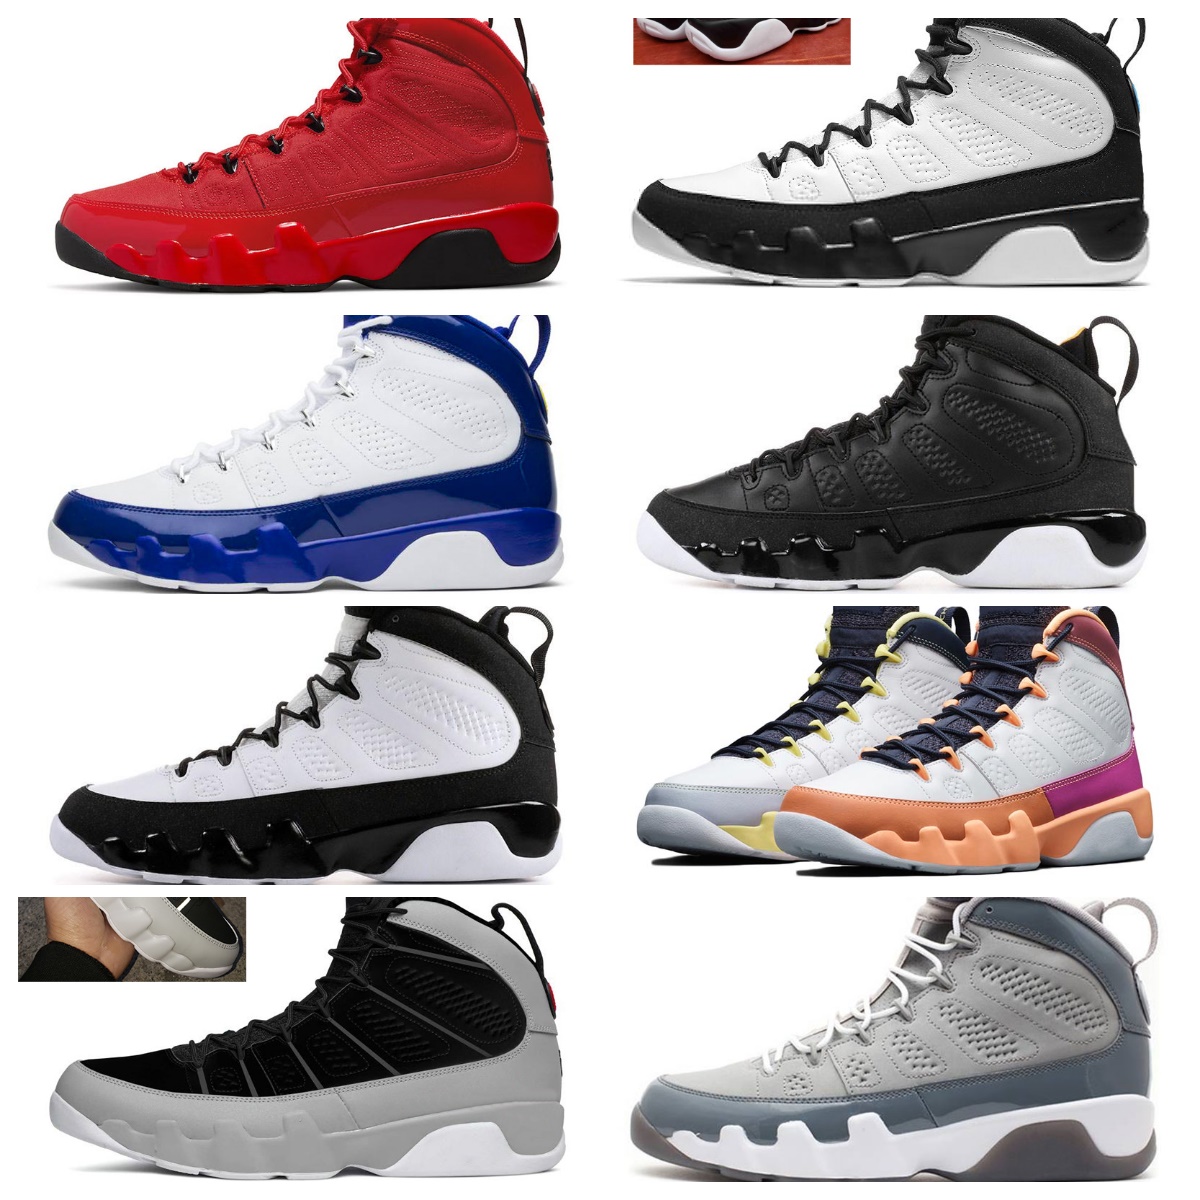 

Retro 9 9s Chile Red Basketball Shoes Mens Change The World Gym Red Racer Blue University Gold Oregon Ducks Space Jam Bred Barons UNC Particle Grey Olive Sport Sneakers, Bubble package bag